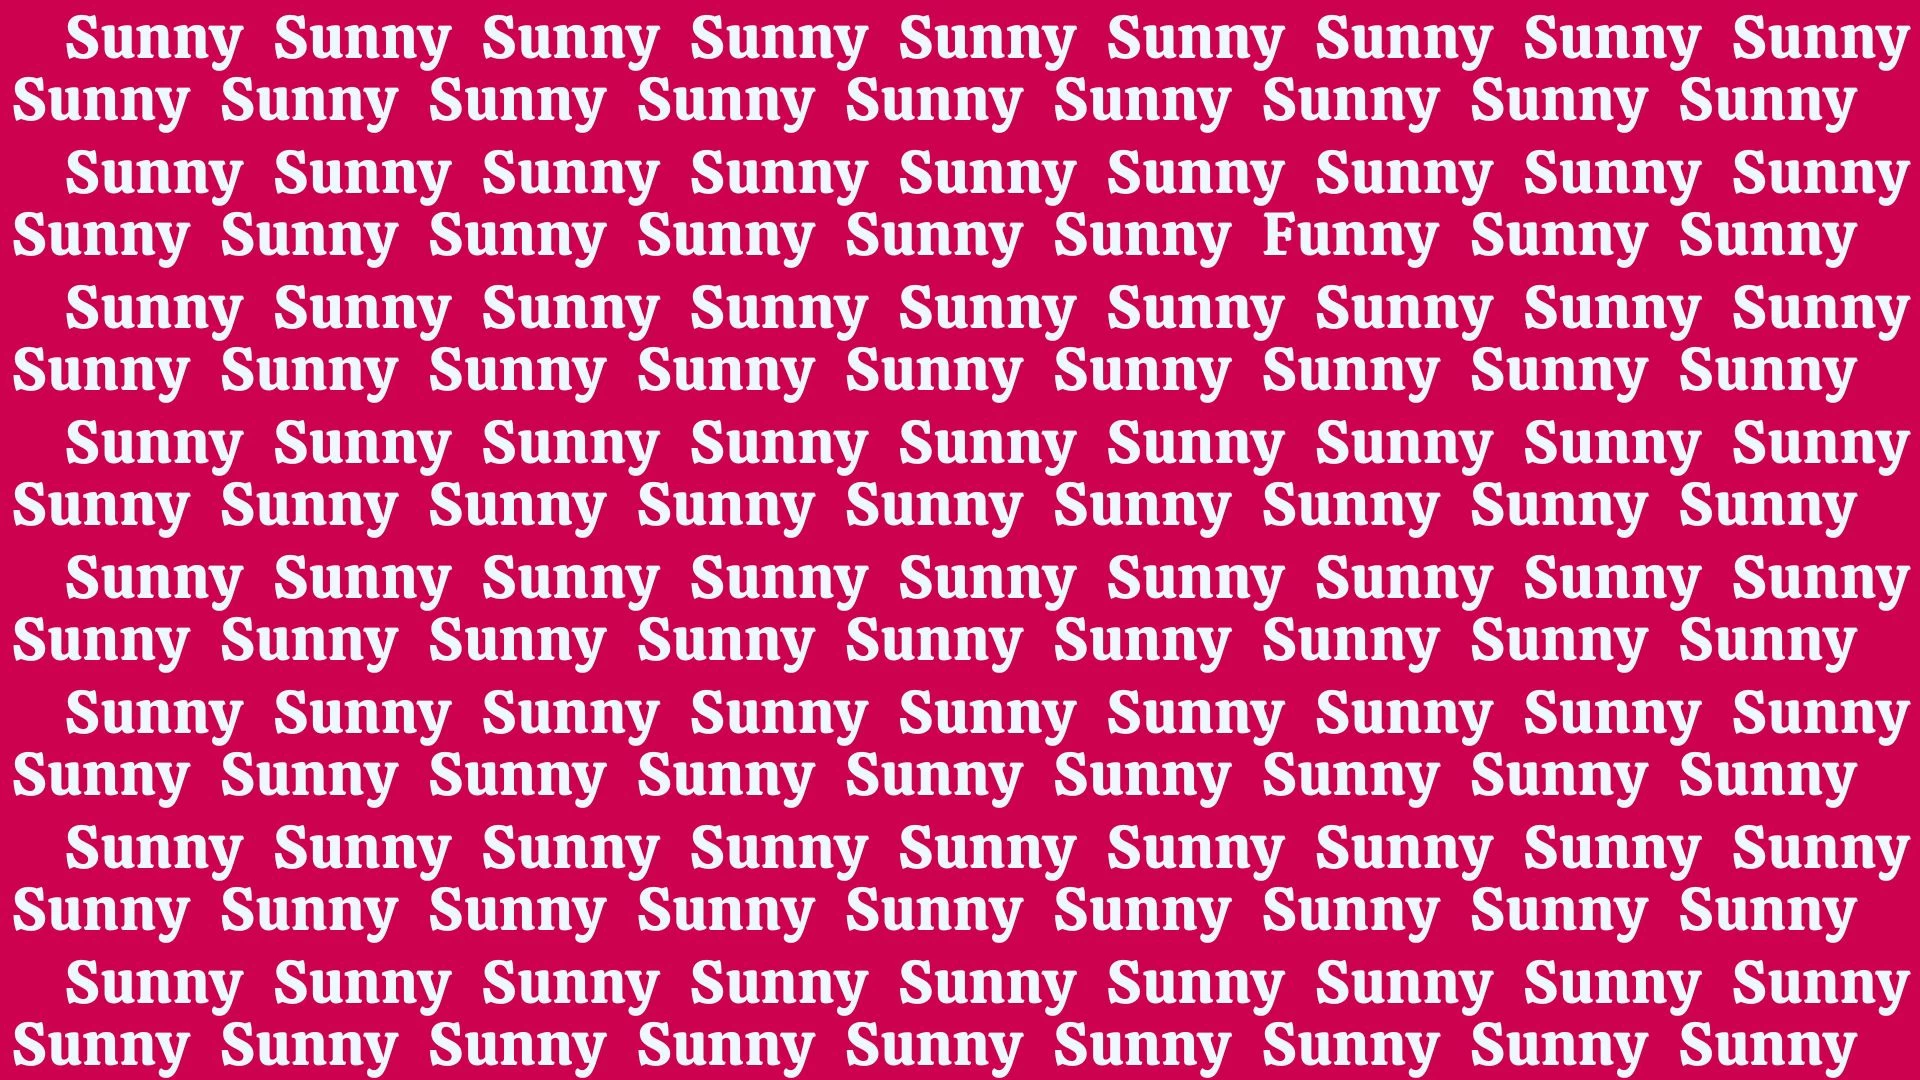 Only Extremely Sharp Eyes Can Find the Word Funny among Sunny in 15 Seconds